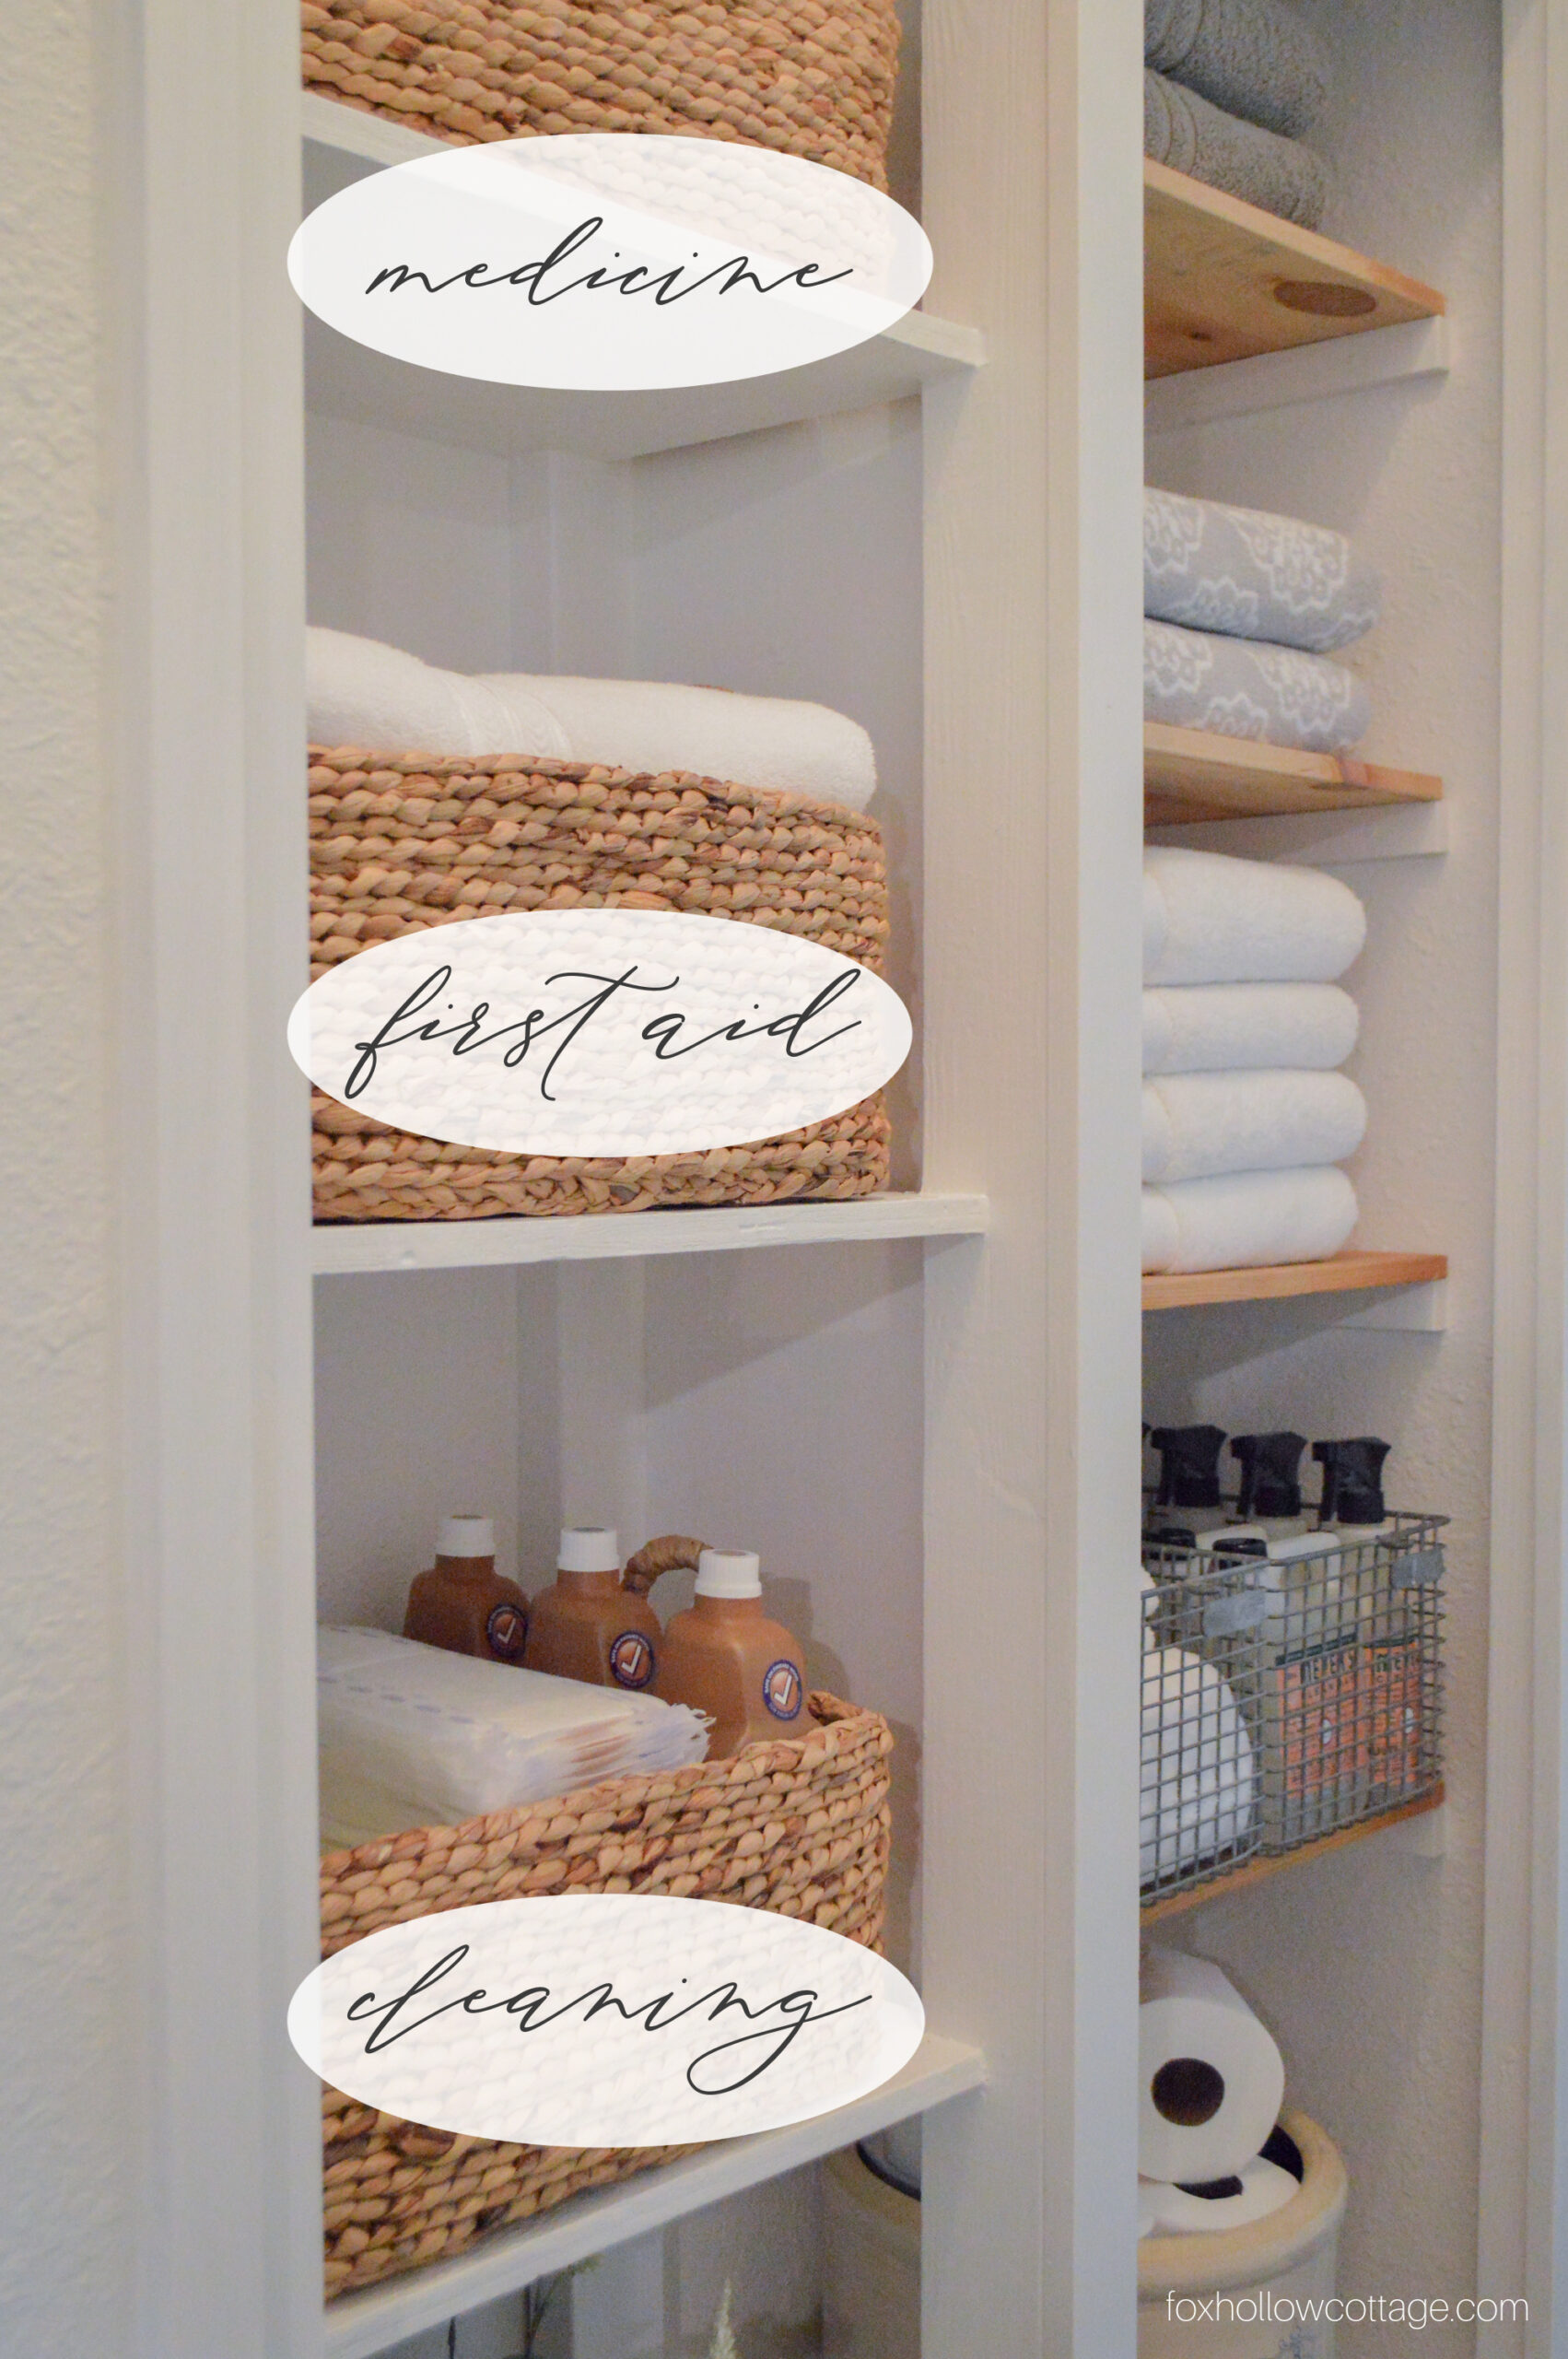 https://foxhollowcottage.com/wp-content/uploads/2021/01/how-to-organize-a-linen-cloest-simple-organizing-ideas-foxhollowcottage.com-easy-affordable-little-house-storage-tips-scaled.jpg